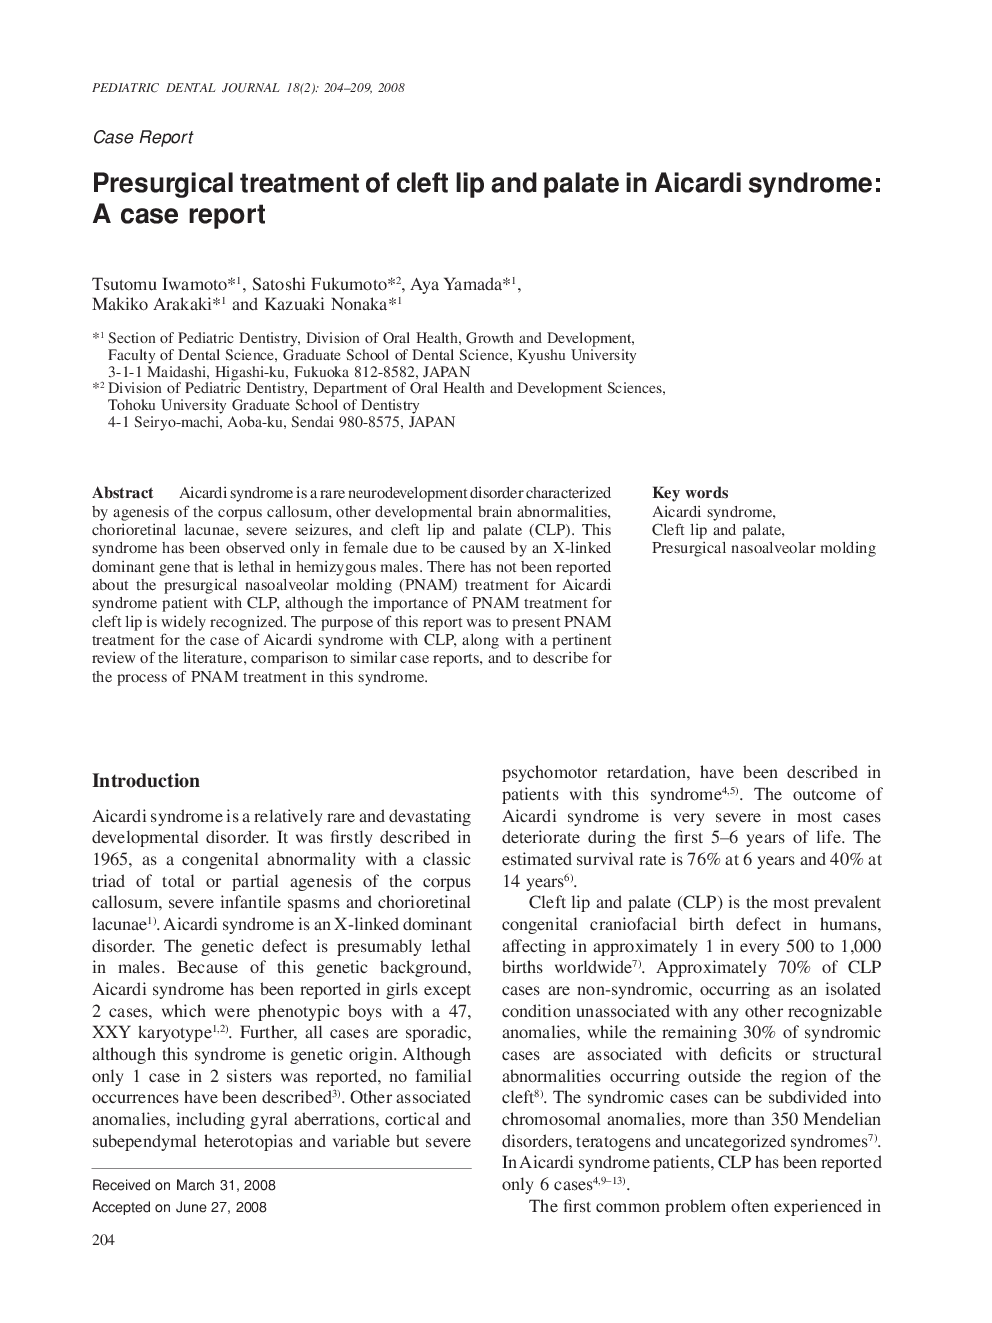 Presurgical treatment of cleft lip and palate in Aicardi syndrome: A case report